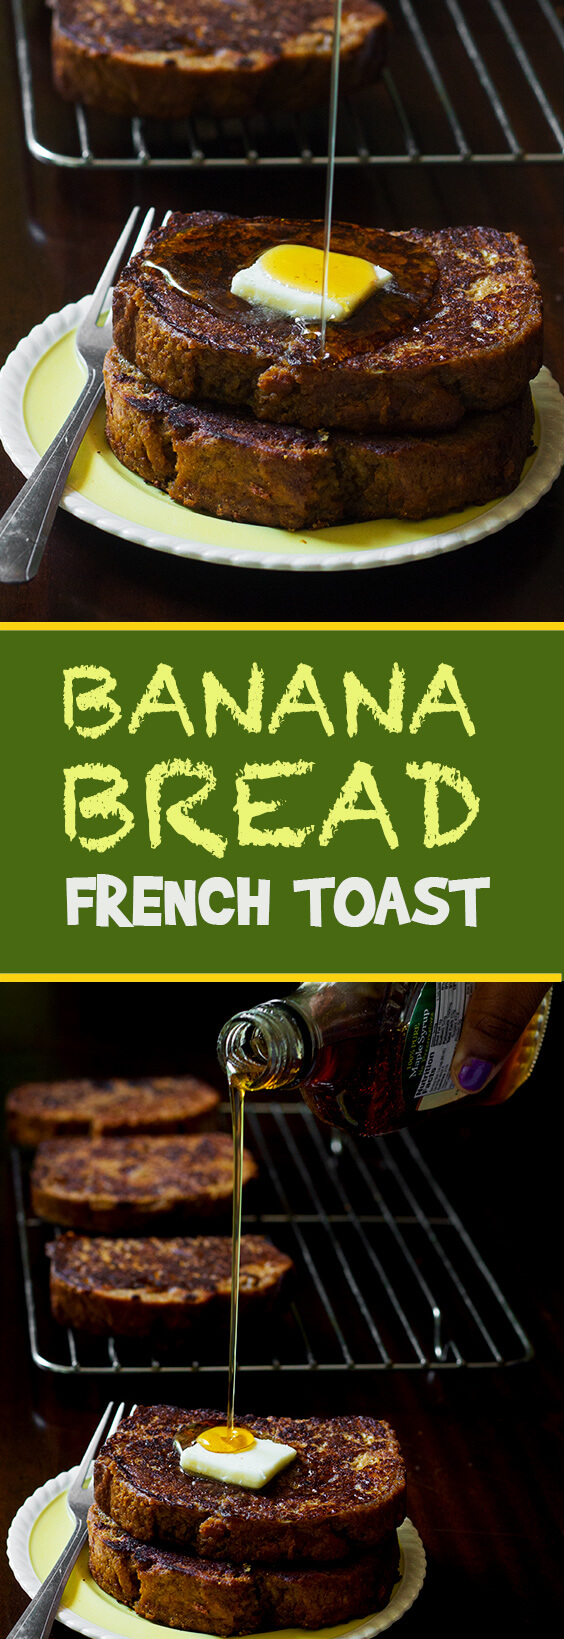 Two breakfast favorites join forces to become one epic bite of yum. Banana bread french toast has all the banana flavor with the crunch of fresh toast.